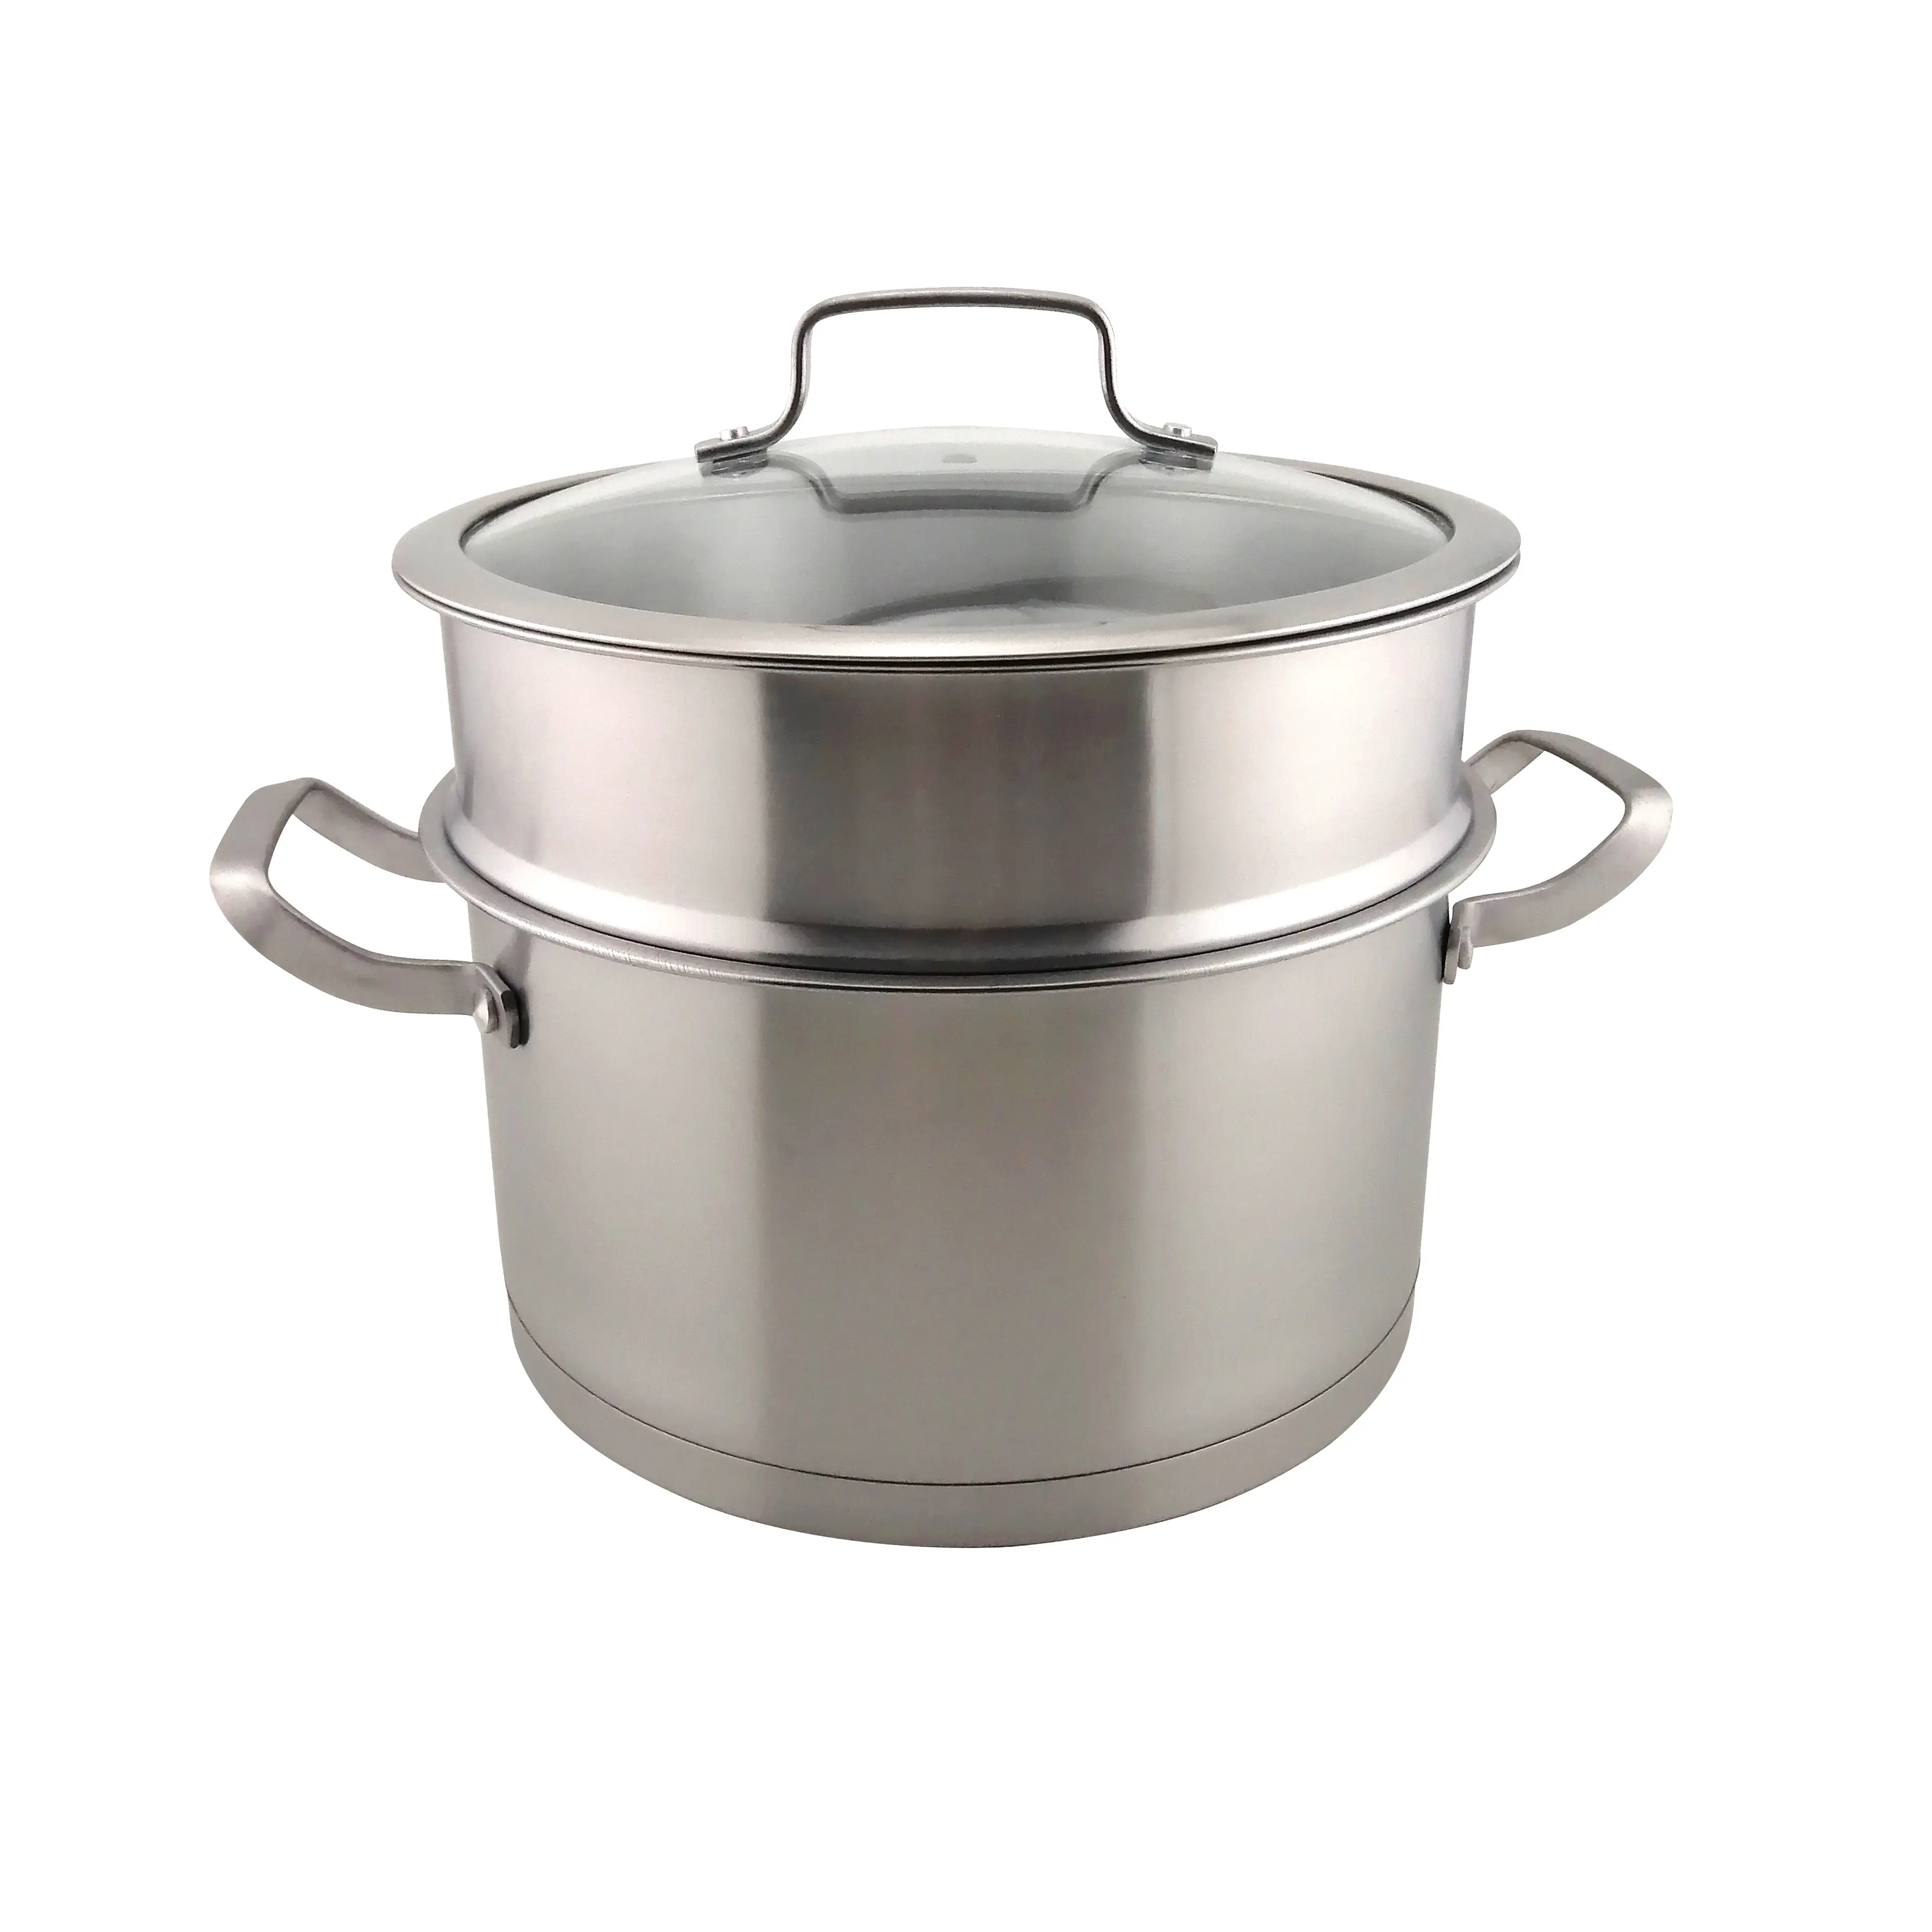 Amazon 2 Layers Steamer Pot Cooking Pot Set Multifunctional Pan Steaming Soup & Stock Pots Kitchen Support 430 Stainless Steel